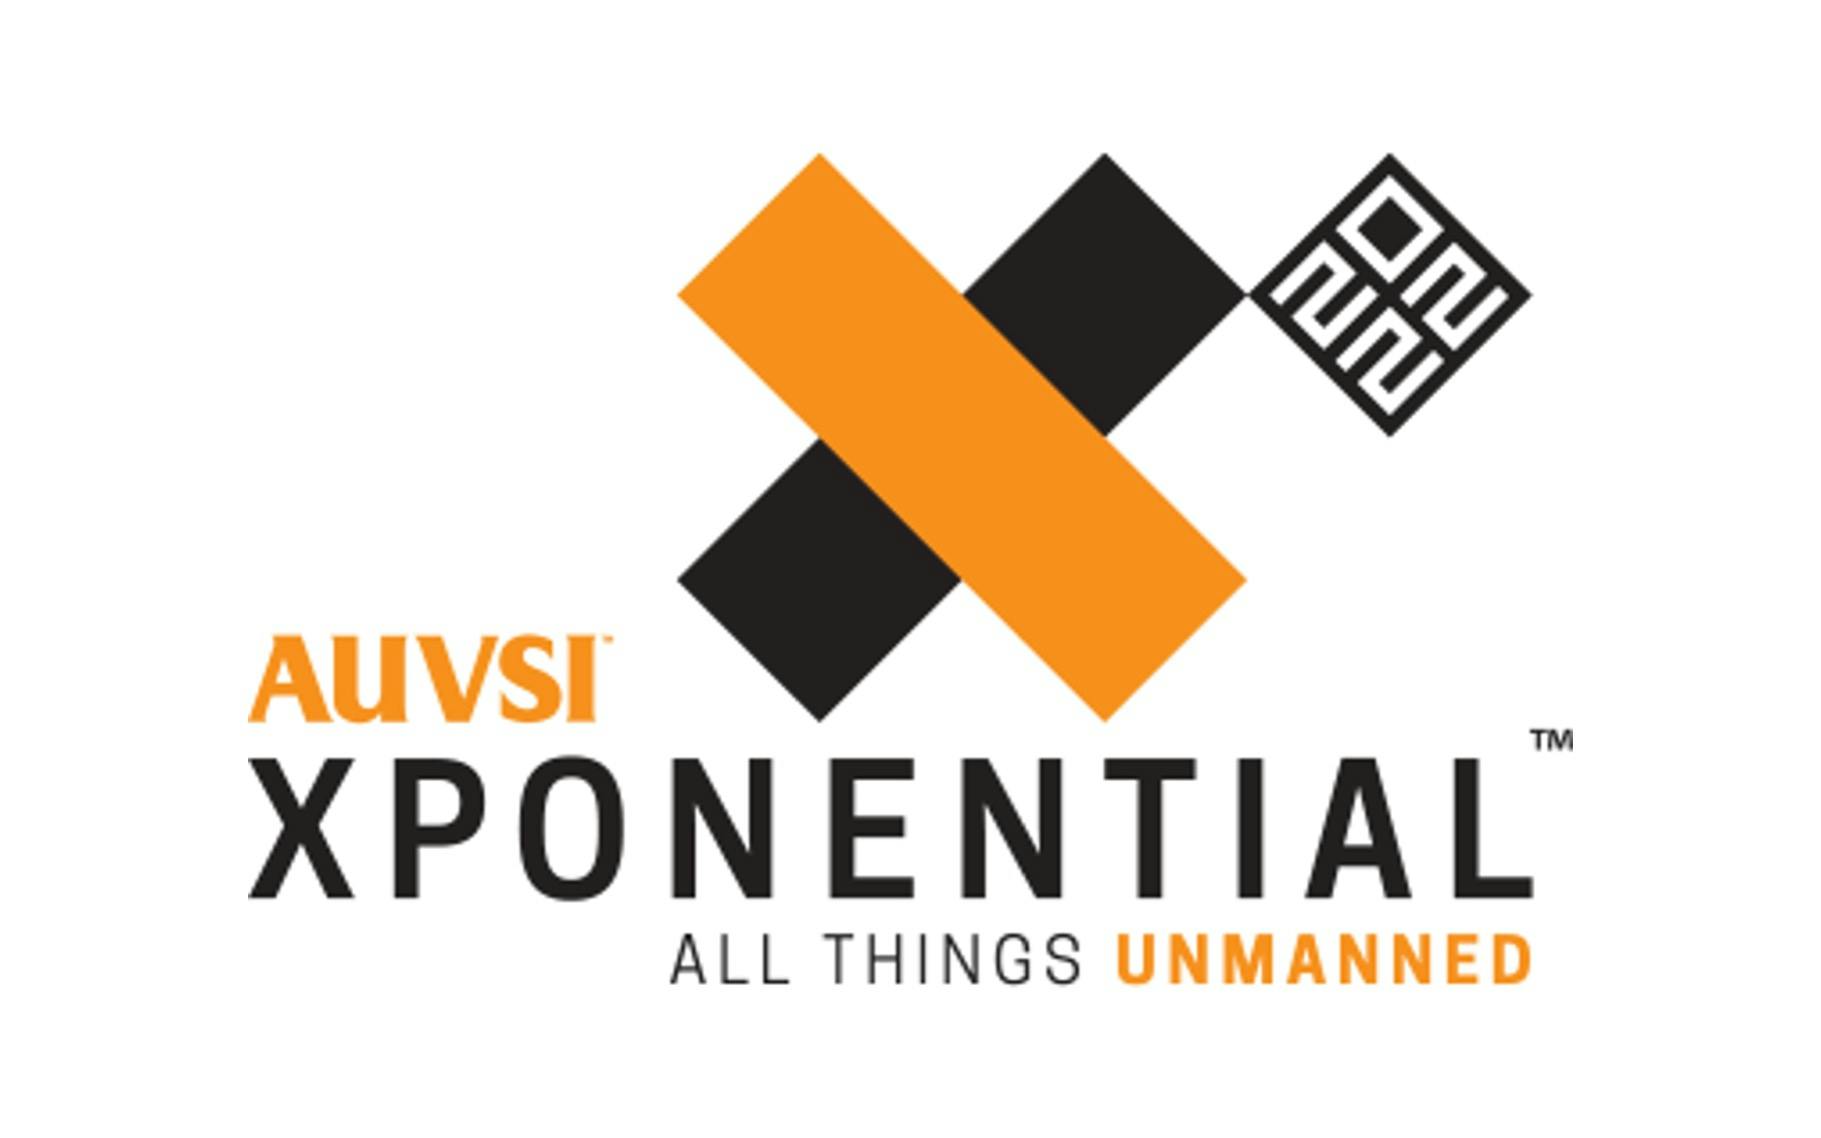 AUVSI Xponential All Things Unmanned 2022 logo